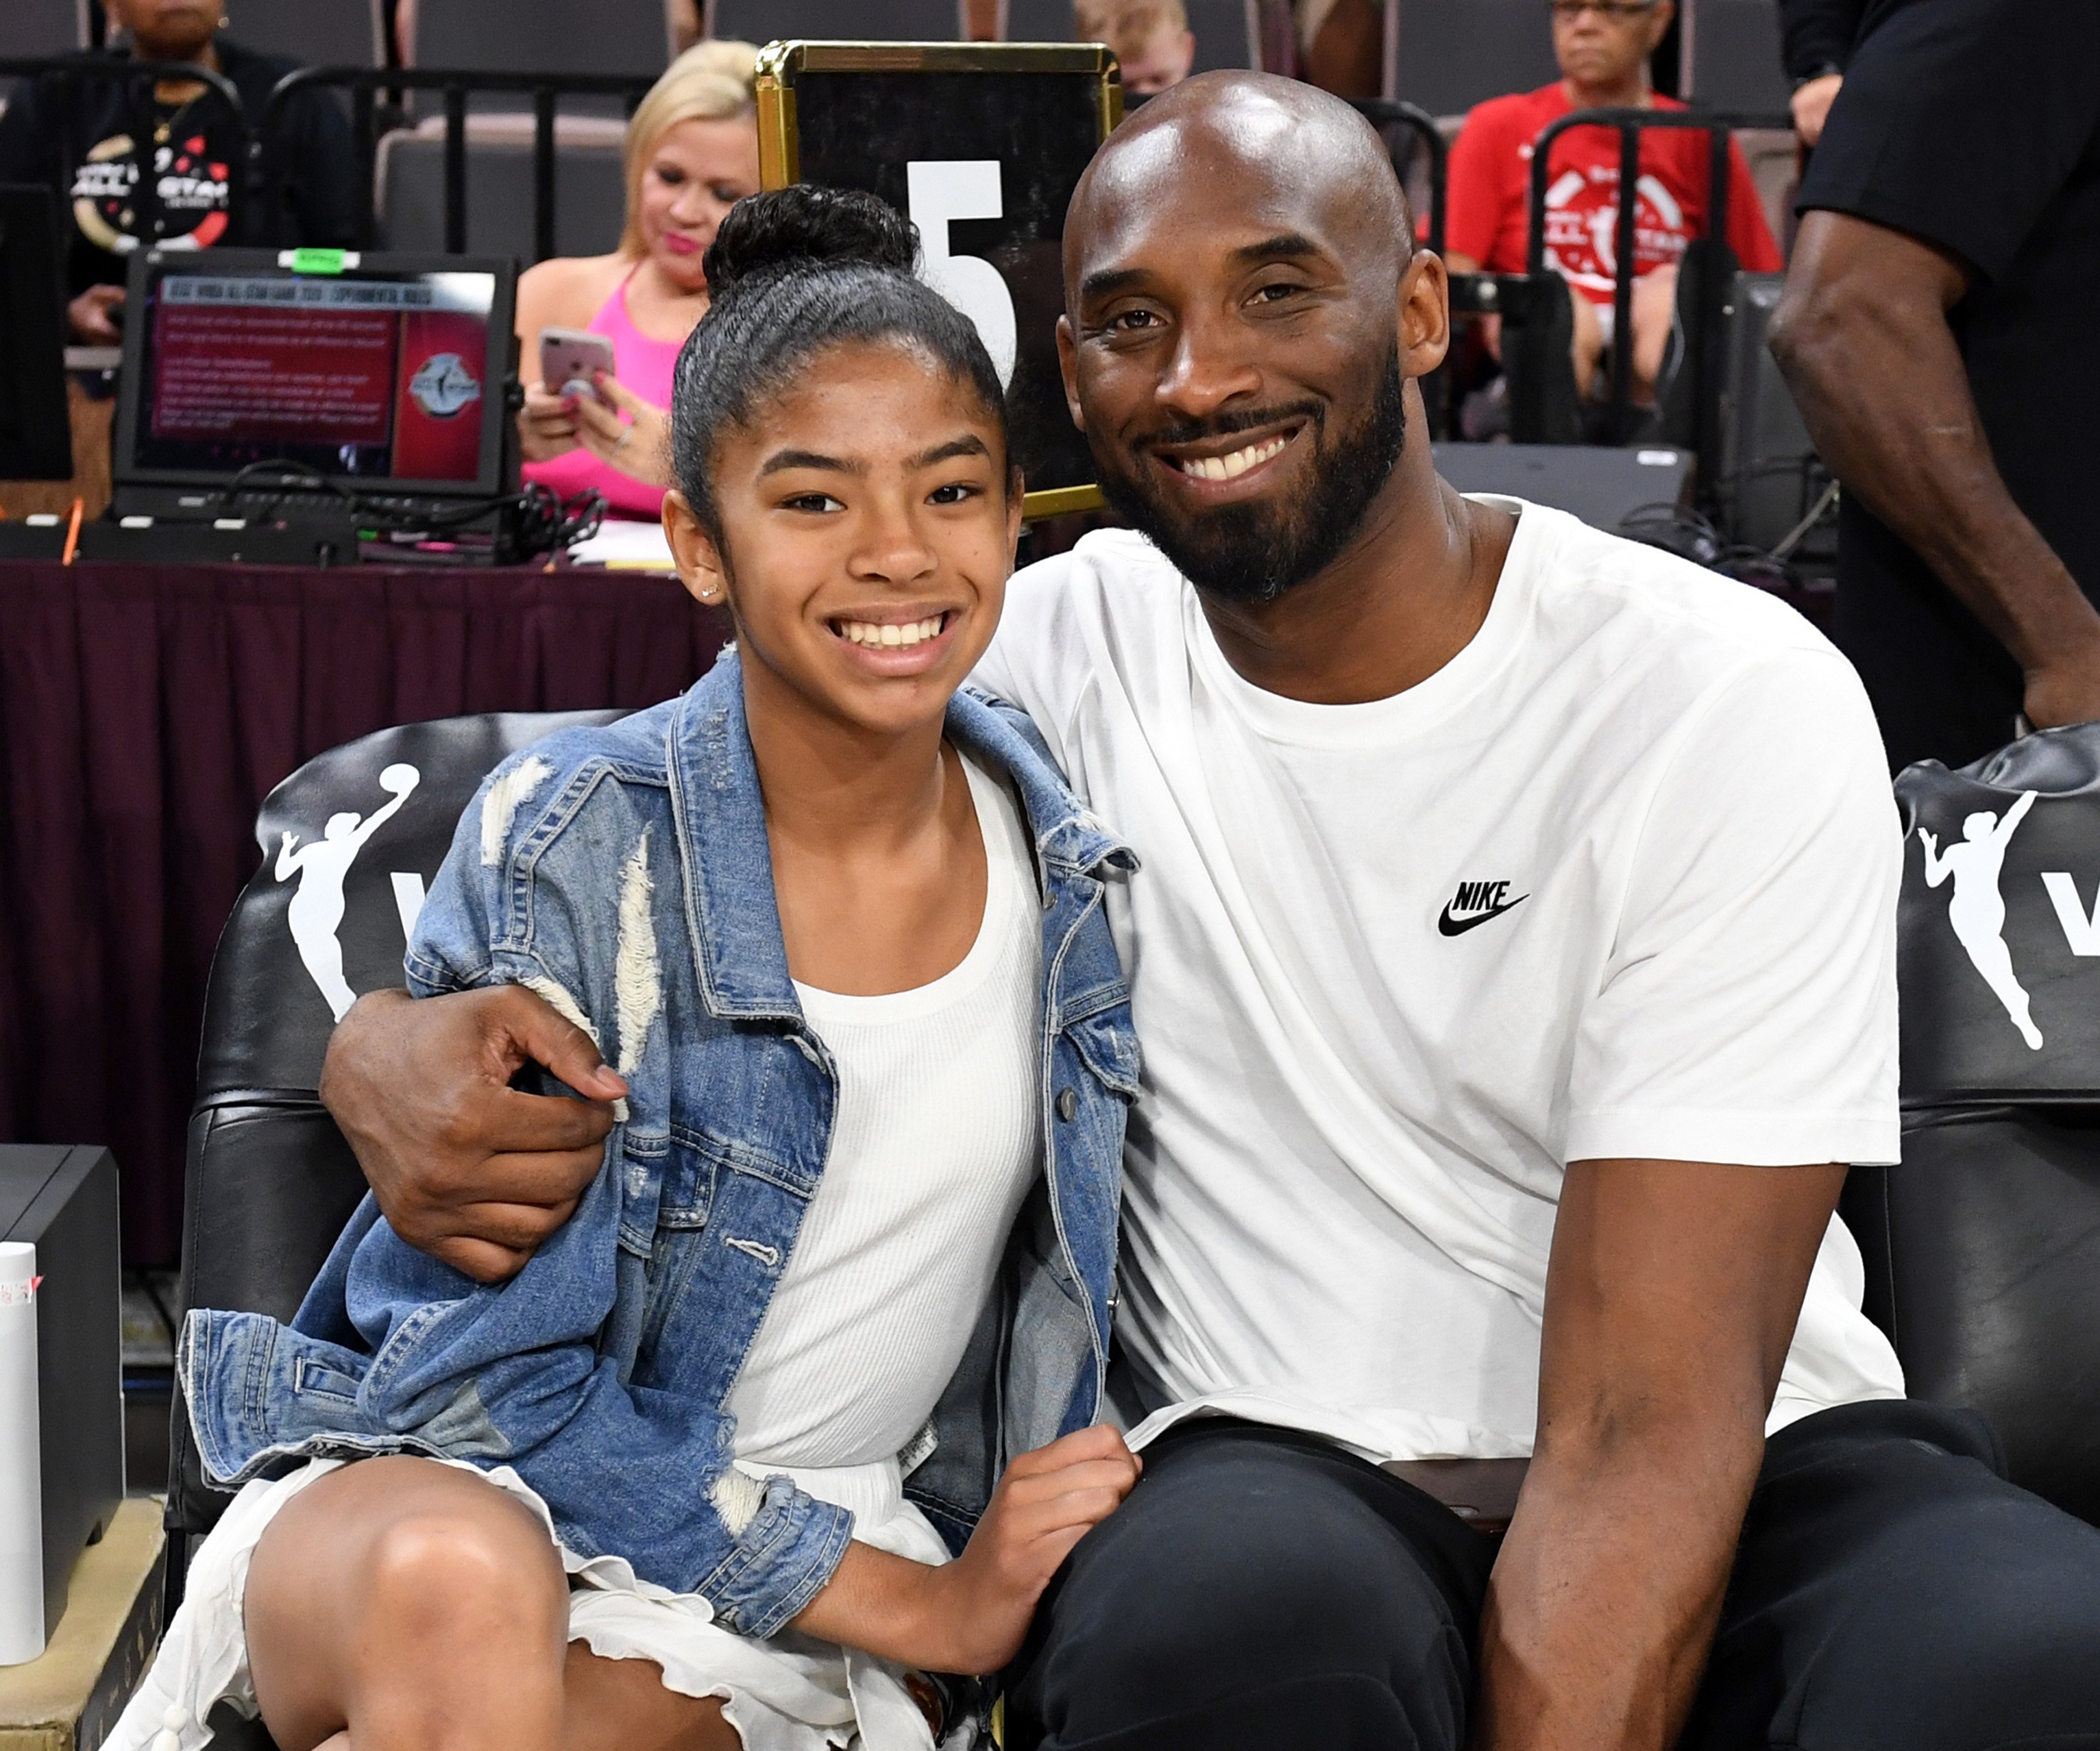 Kobe and Gianna Bryant  attend the WNBA All-Star Game 2019 on July 27, 2019 in Las Vegas, Nevada. | Source: Getty Images